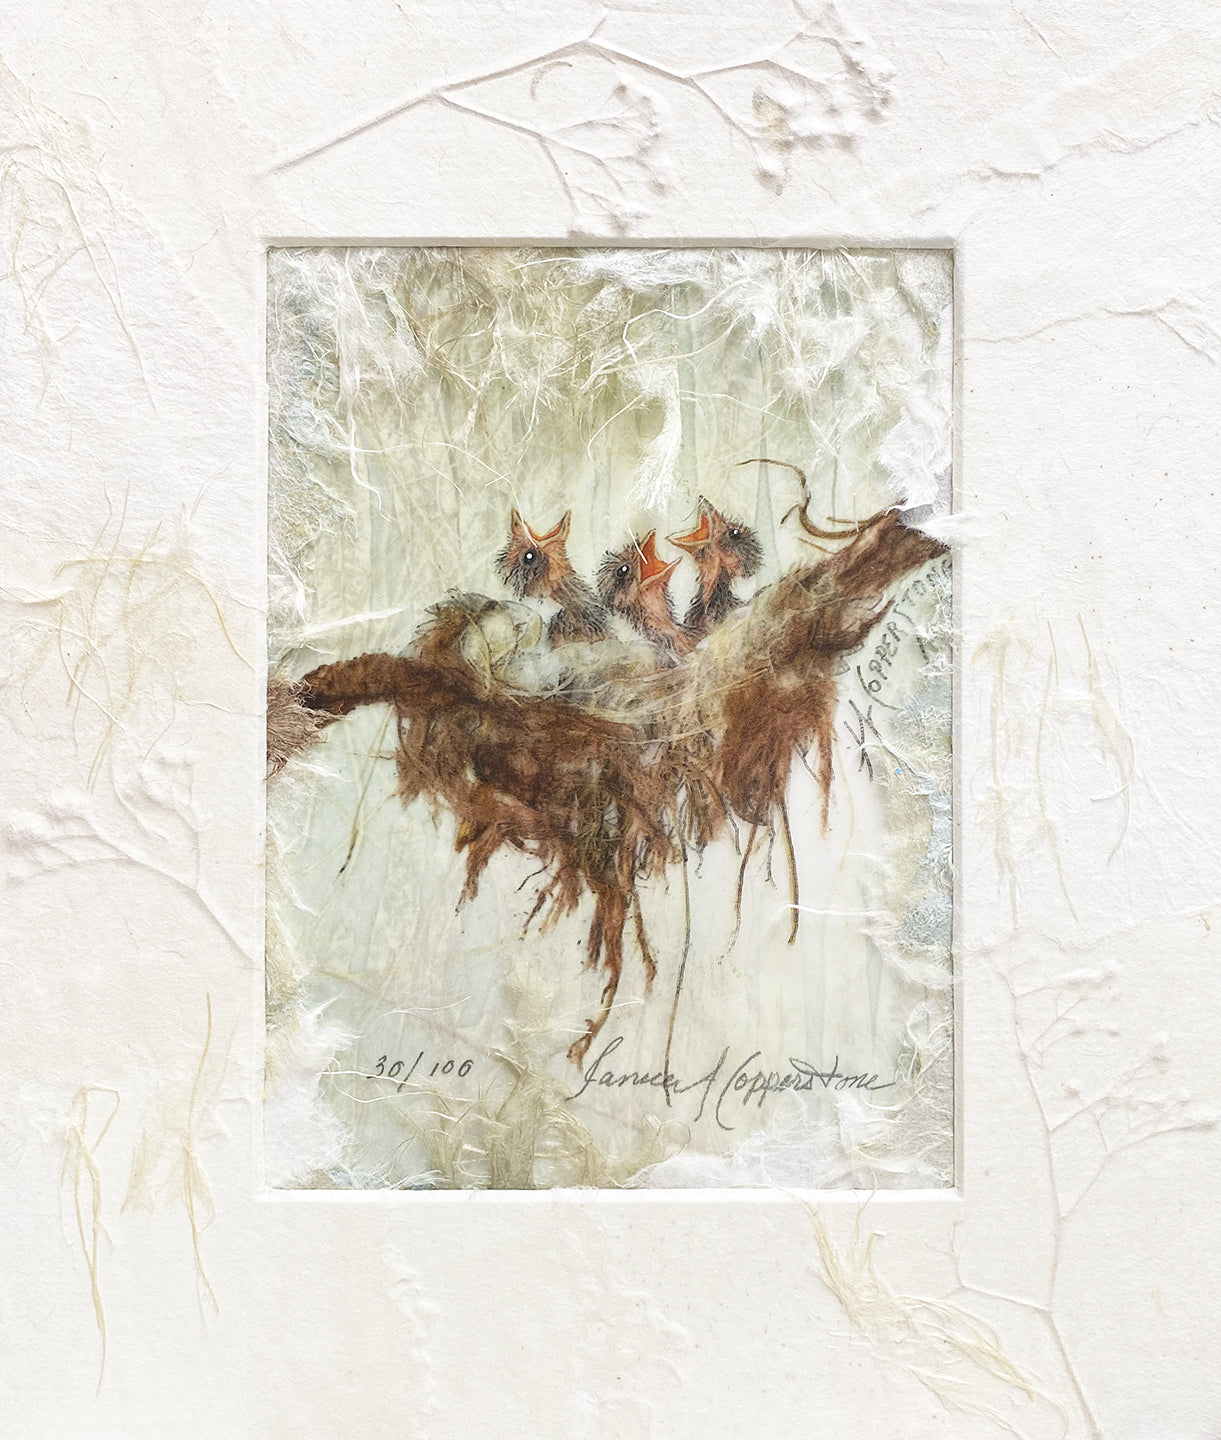 Baby birds mixed media fine art print by Janice A. Copperstone of Milford, Mich.